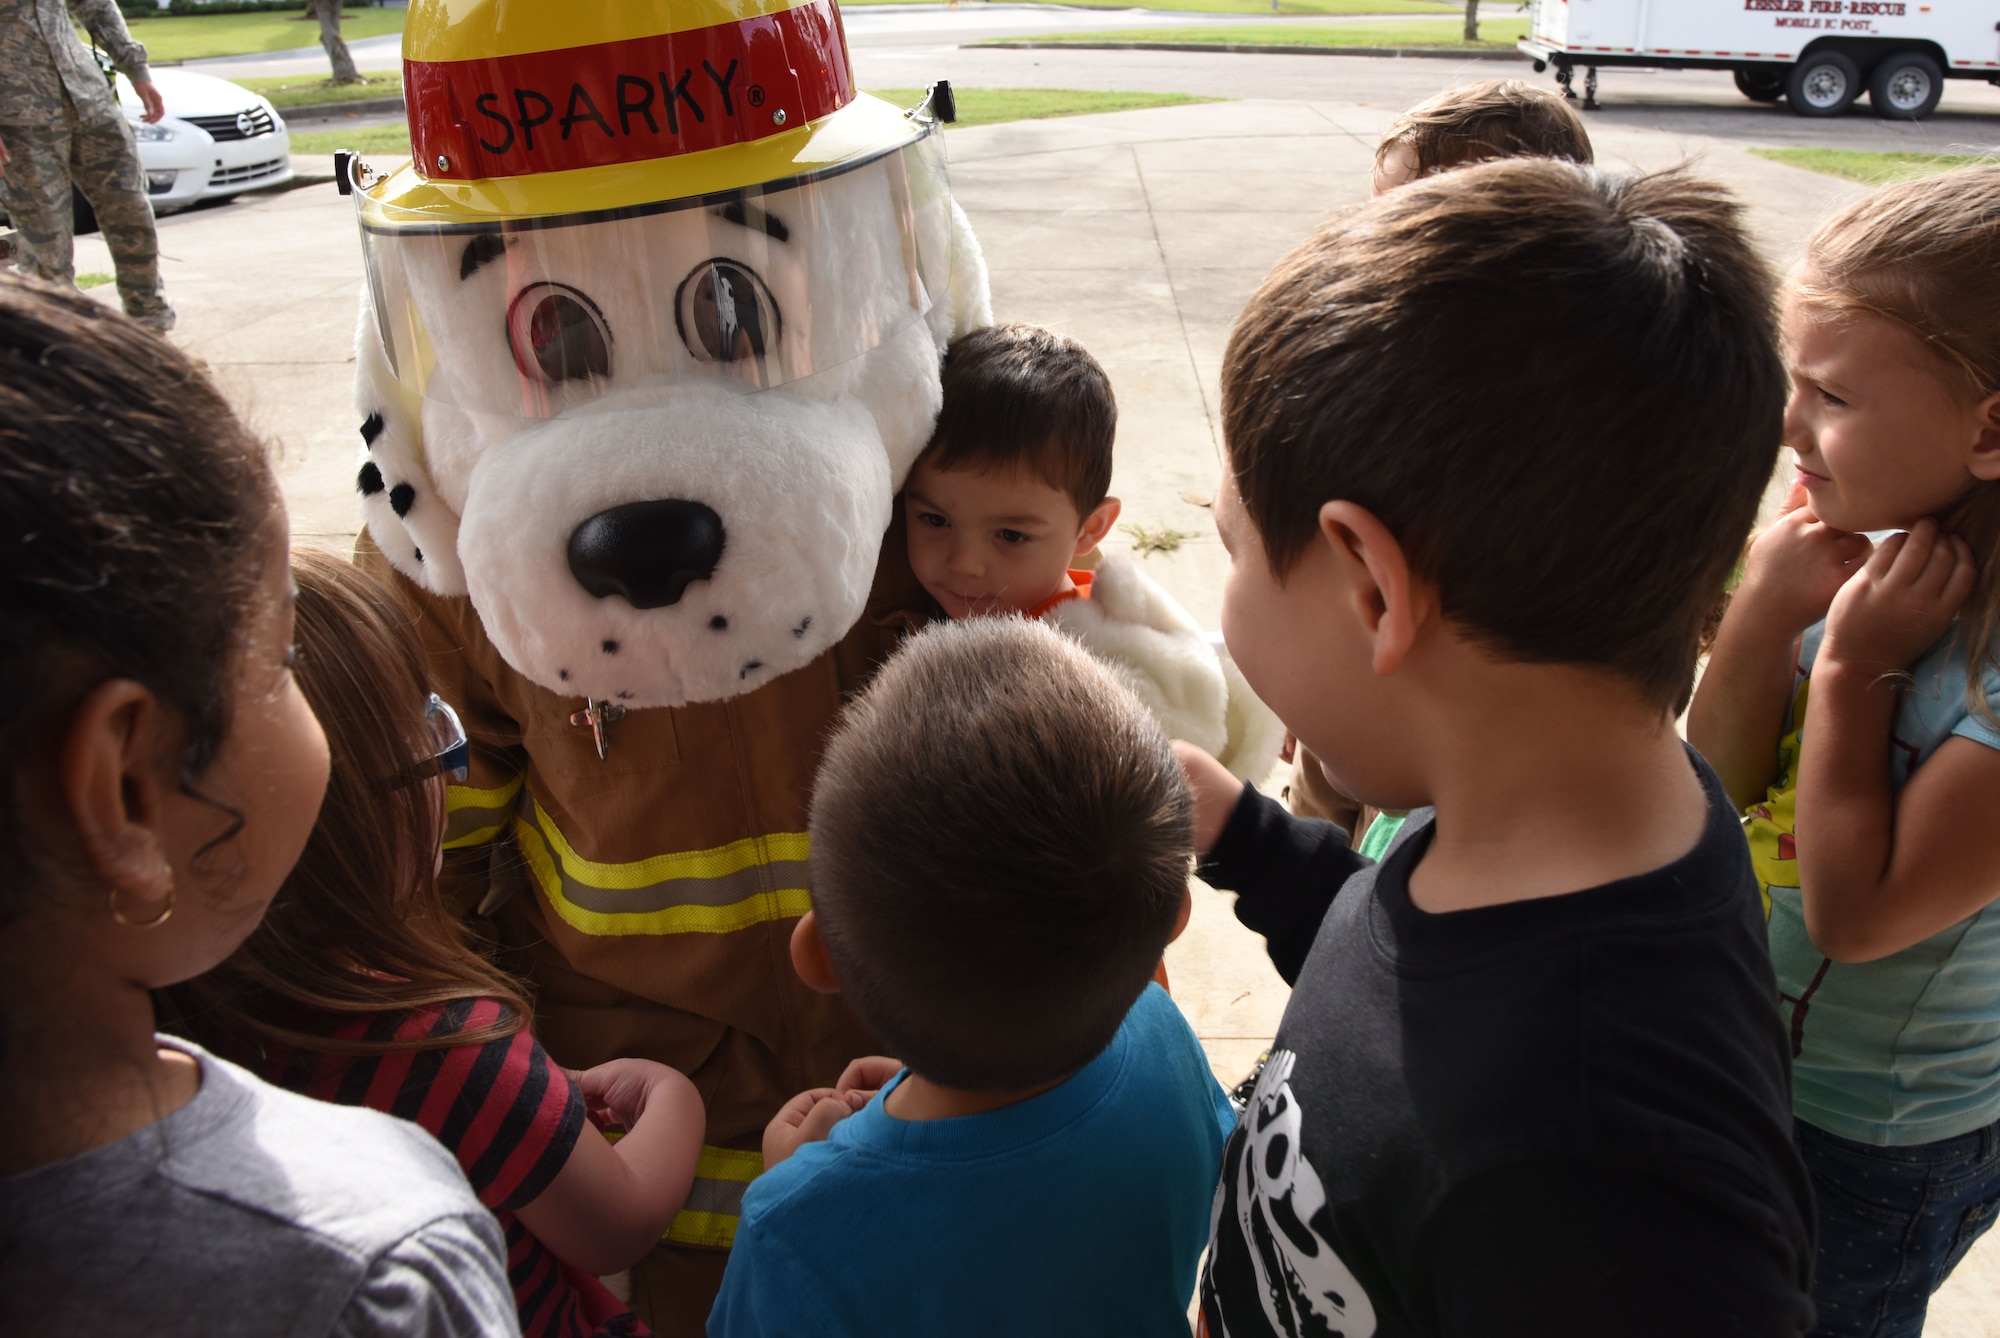 Sparky, the Fire Dog, visits children at the Child Development Center during Fire Prevention Week on Keesler Air Force Base, Mississippi, Oct. 10, 2018. The week-long event included fire drills, literature hand-outs and stove fire demonstrations around the base and concluded with an open house at the fire department Oct. 13. (U.S. Air Force photo by Kemberly Groue)